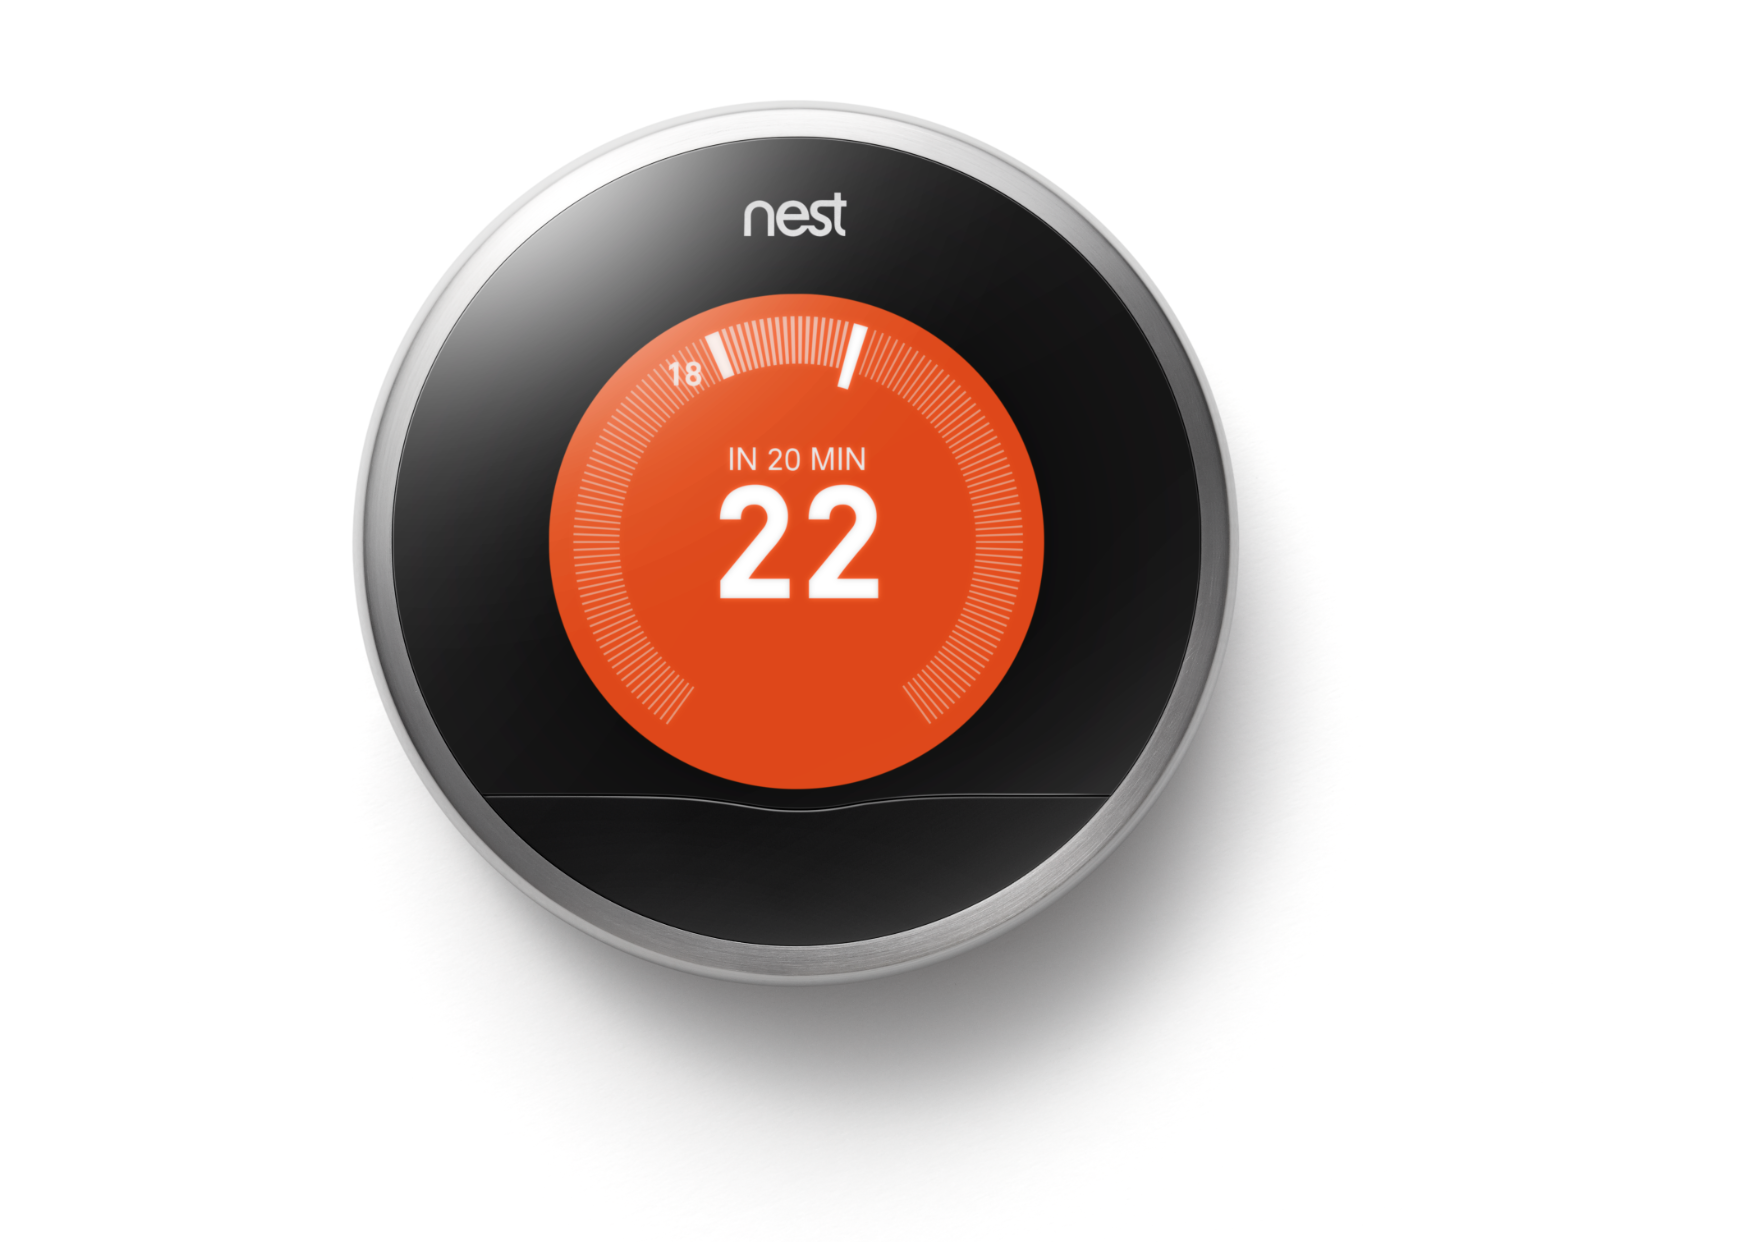 The Nest thermostat receives a major firmware update